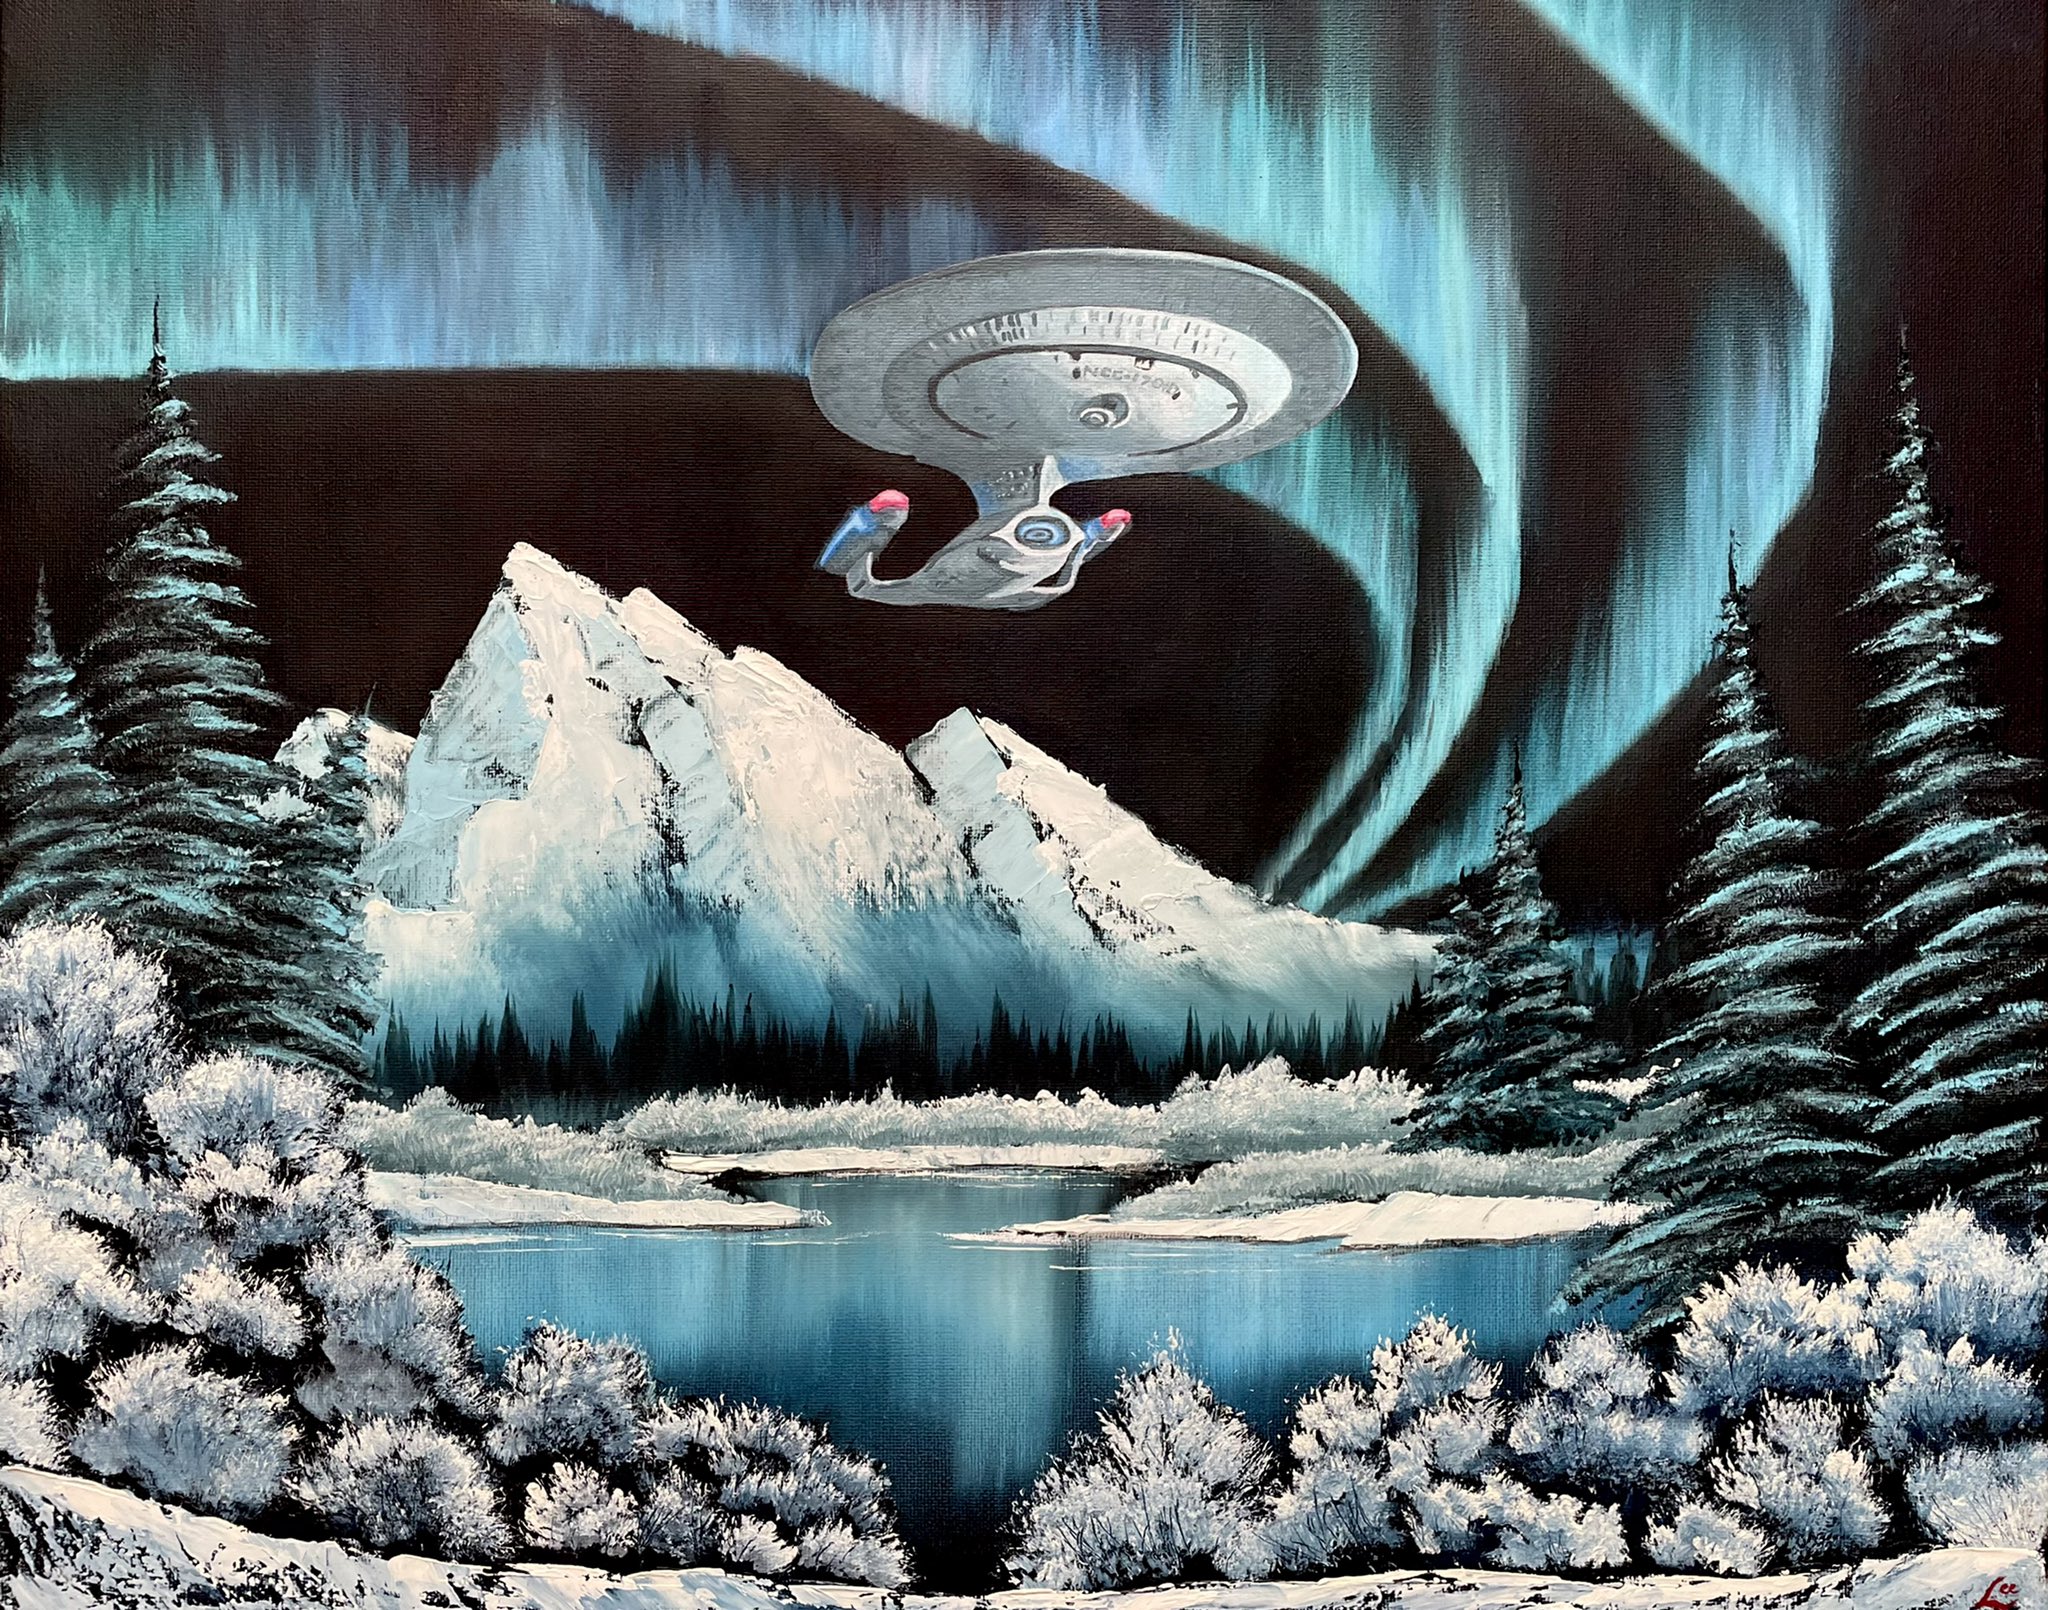 Art by Jeff Lee on Twitter: ""Northern Lights, Sector 001" Number 10 in a series #happylittleinhabitants 16" x 20" Oil/acrylic on canvas on "Northern Lights" by Bob Ross "Joy of Painting"